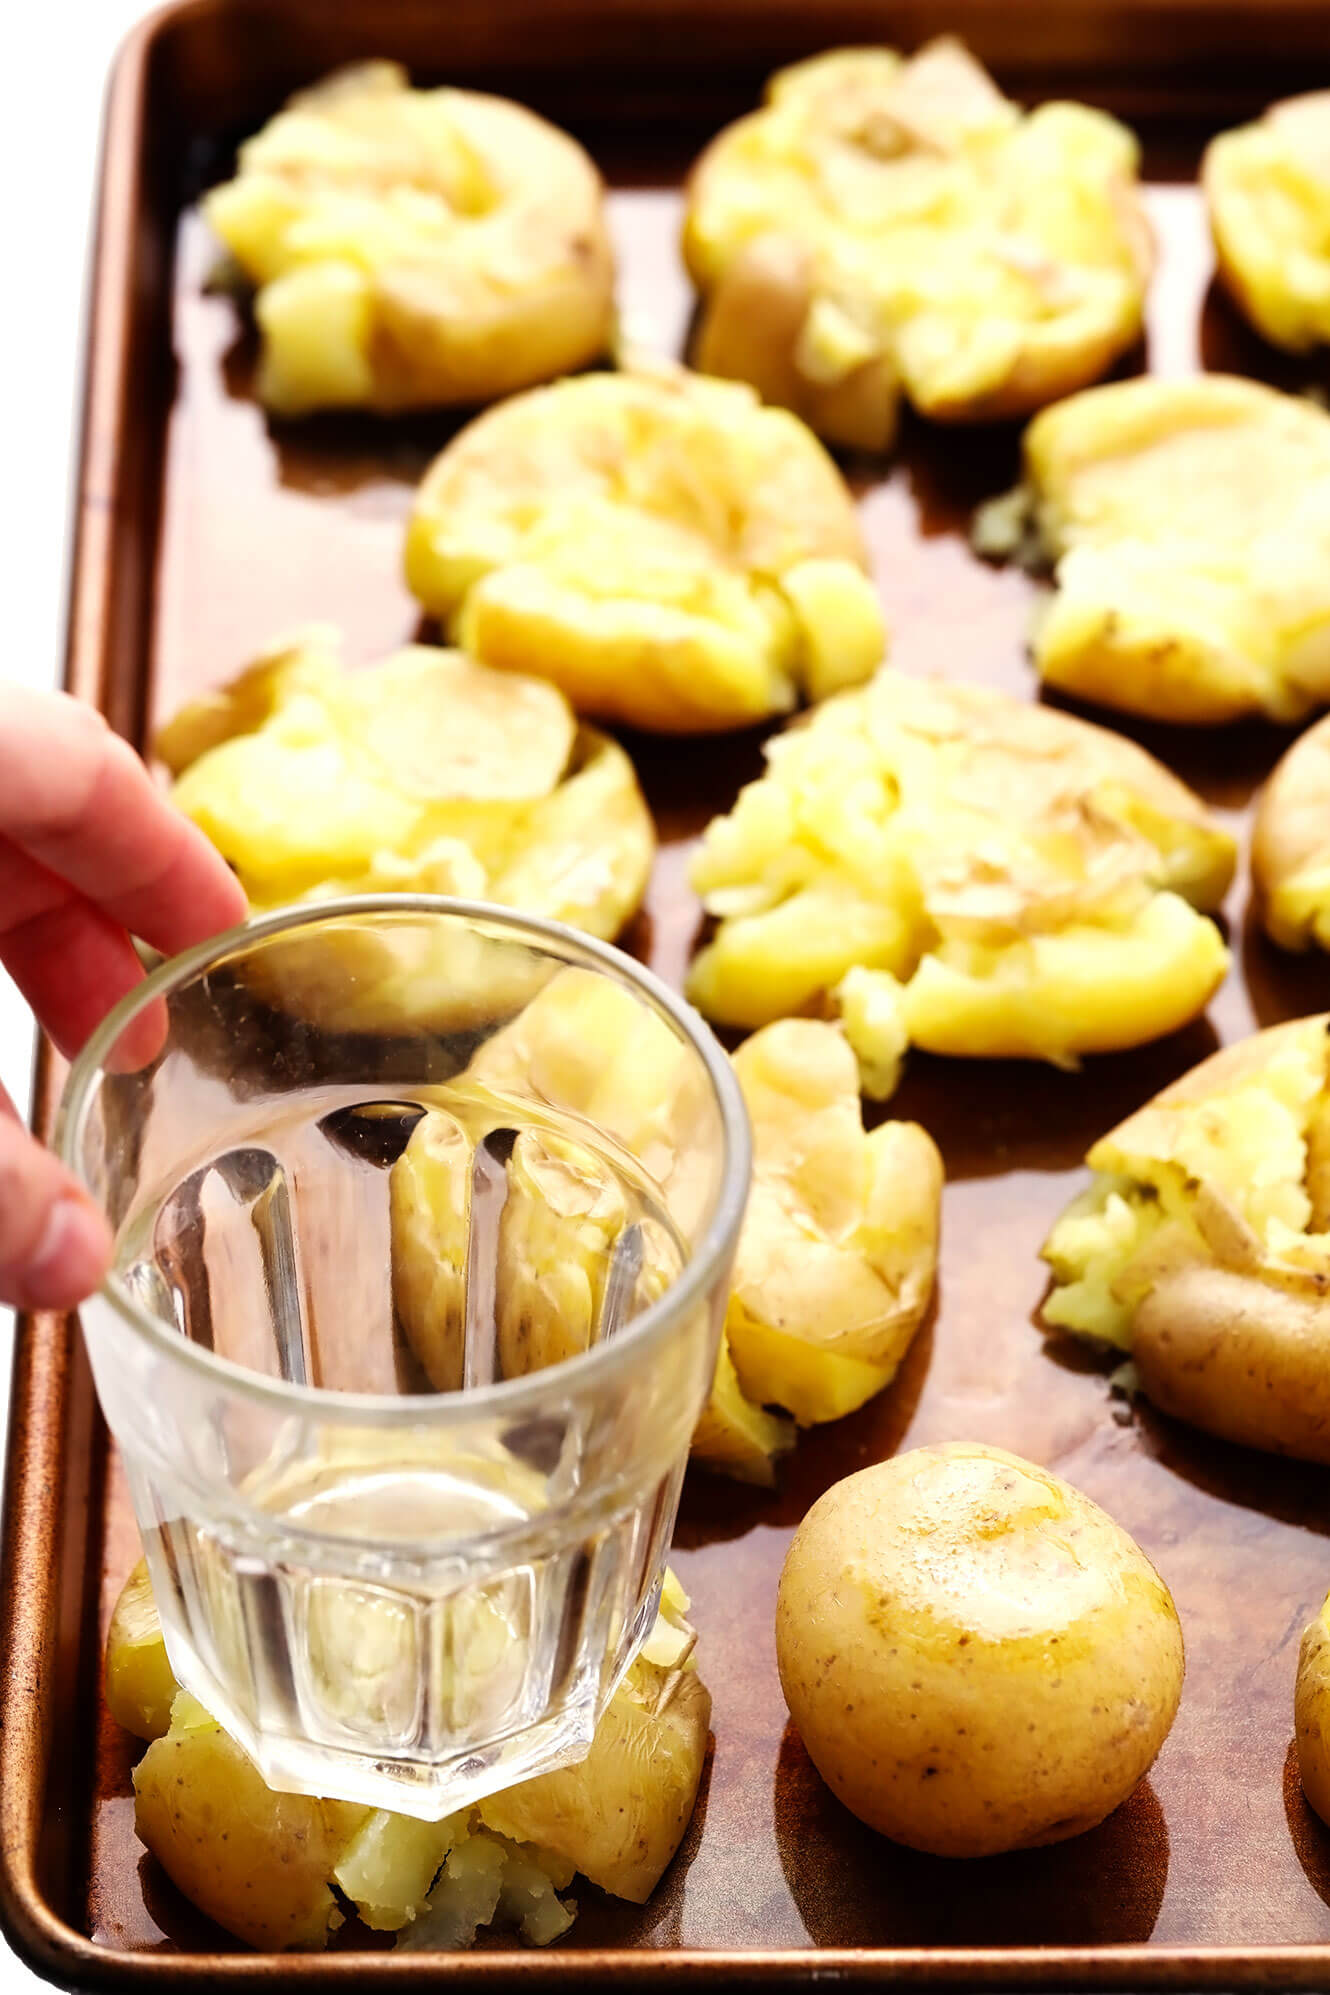 Smashing boiled potatoes with a drinking glass